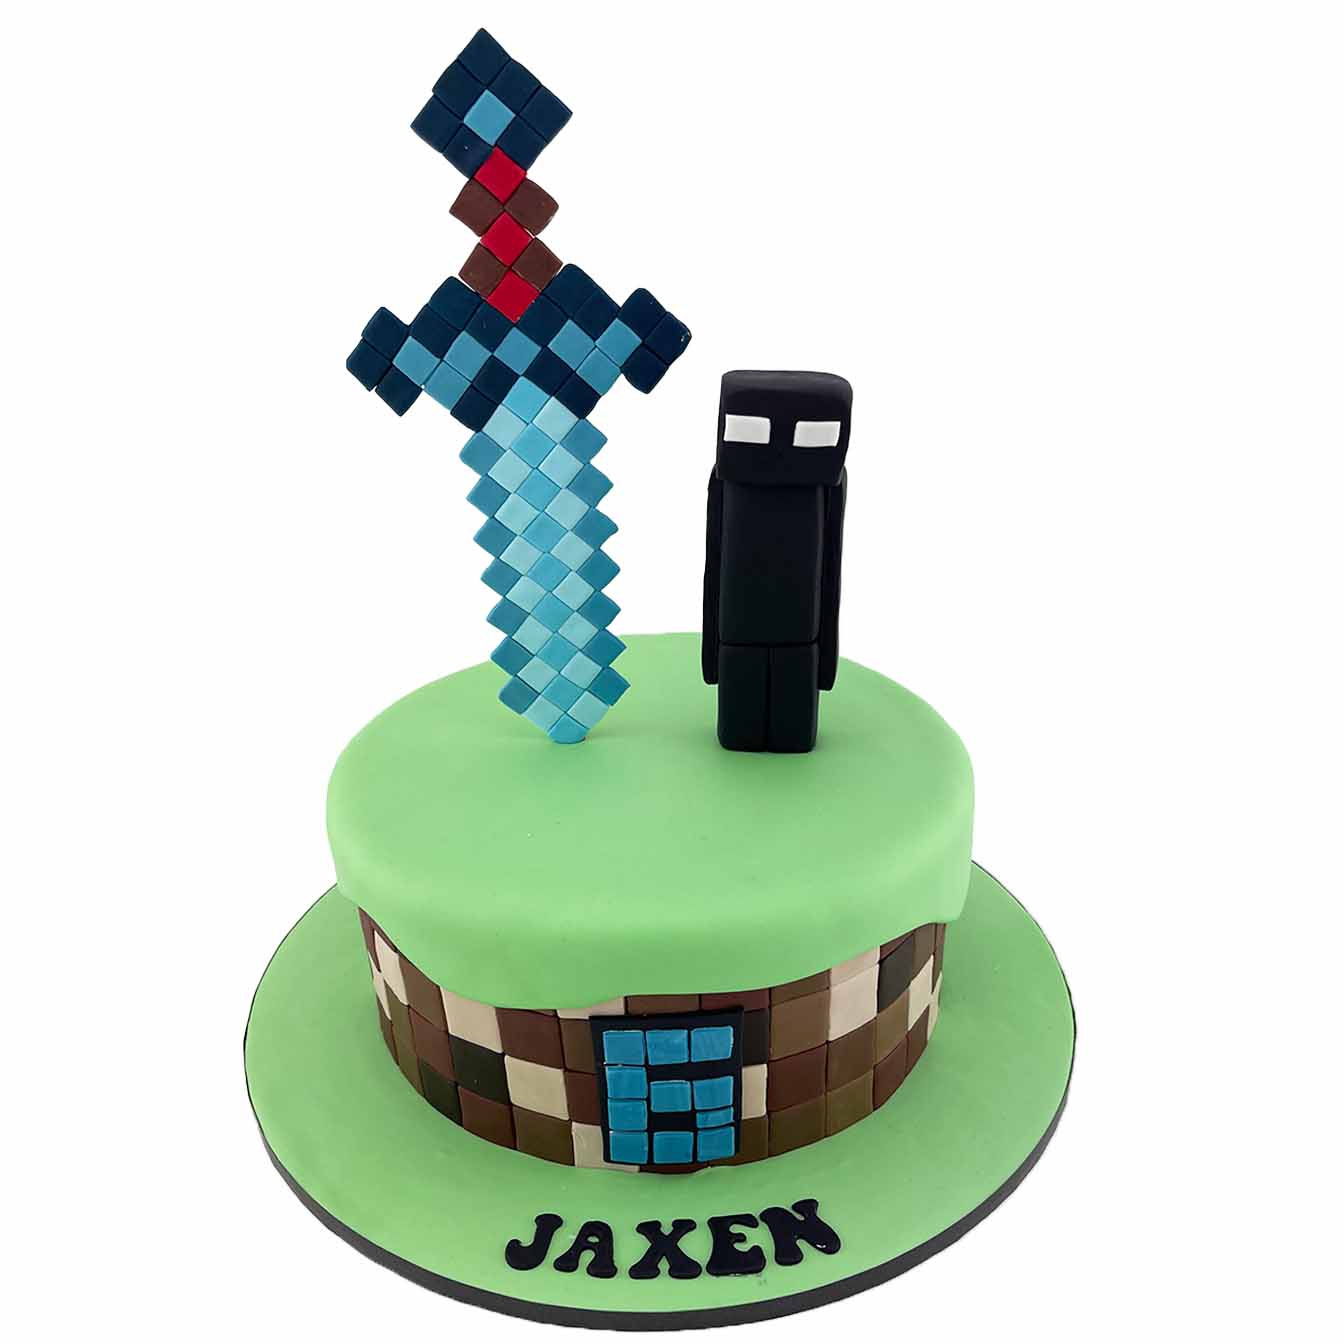 Minecraft Adventure Cake - A 1-tier cake with Minecraft squares, a blue moulded sword, and a menacing Ender-man, a captivating centrepiece for gamers and Minecraft enthusiasts.